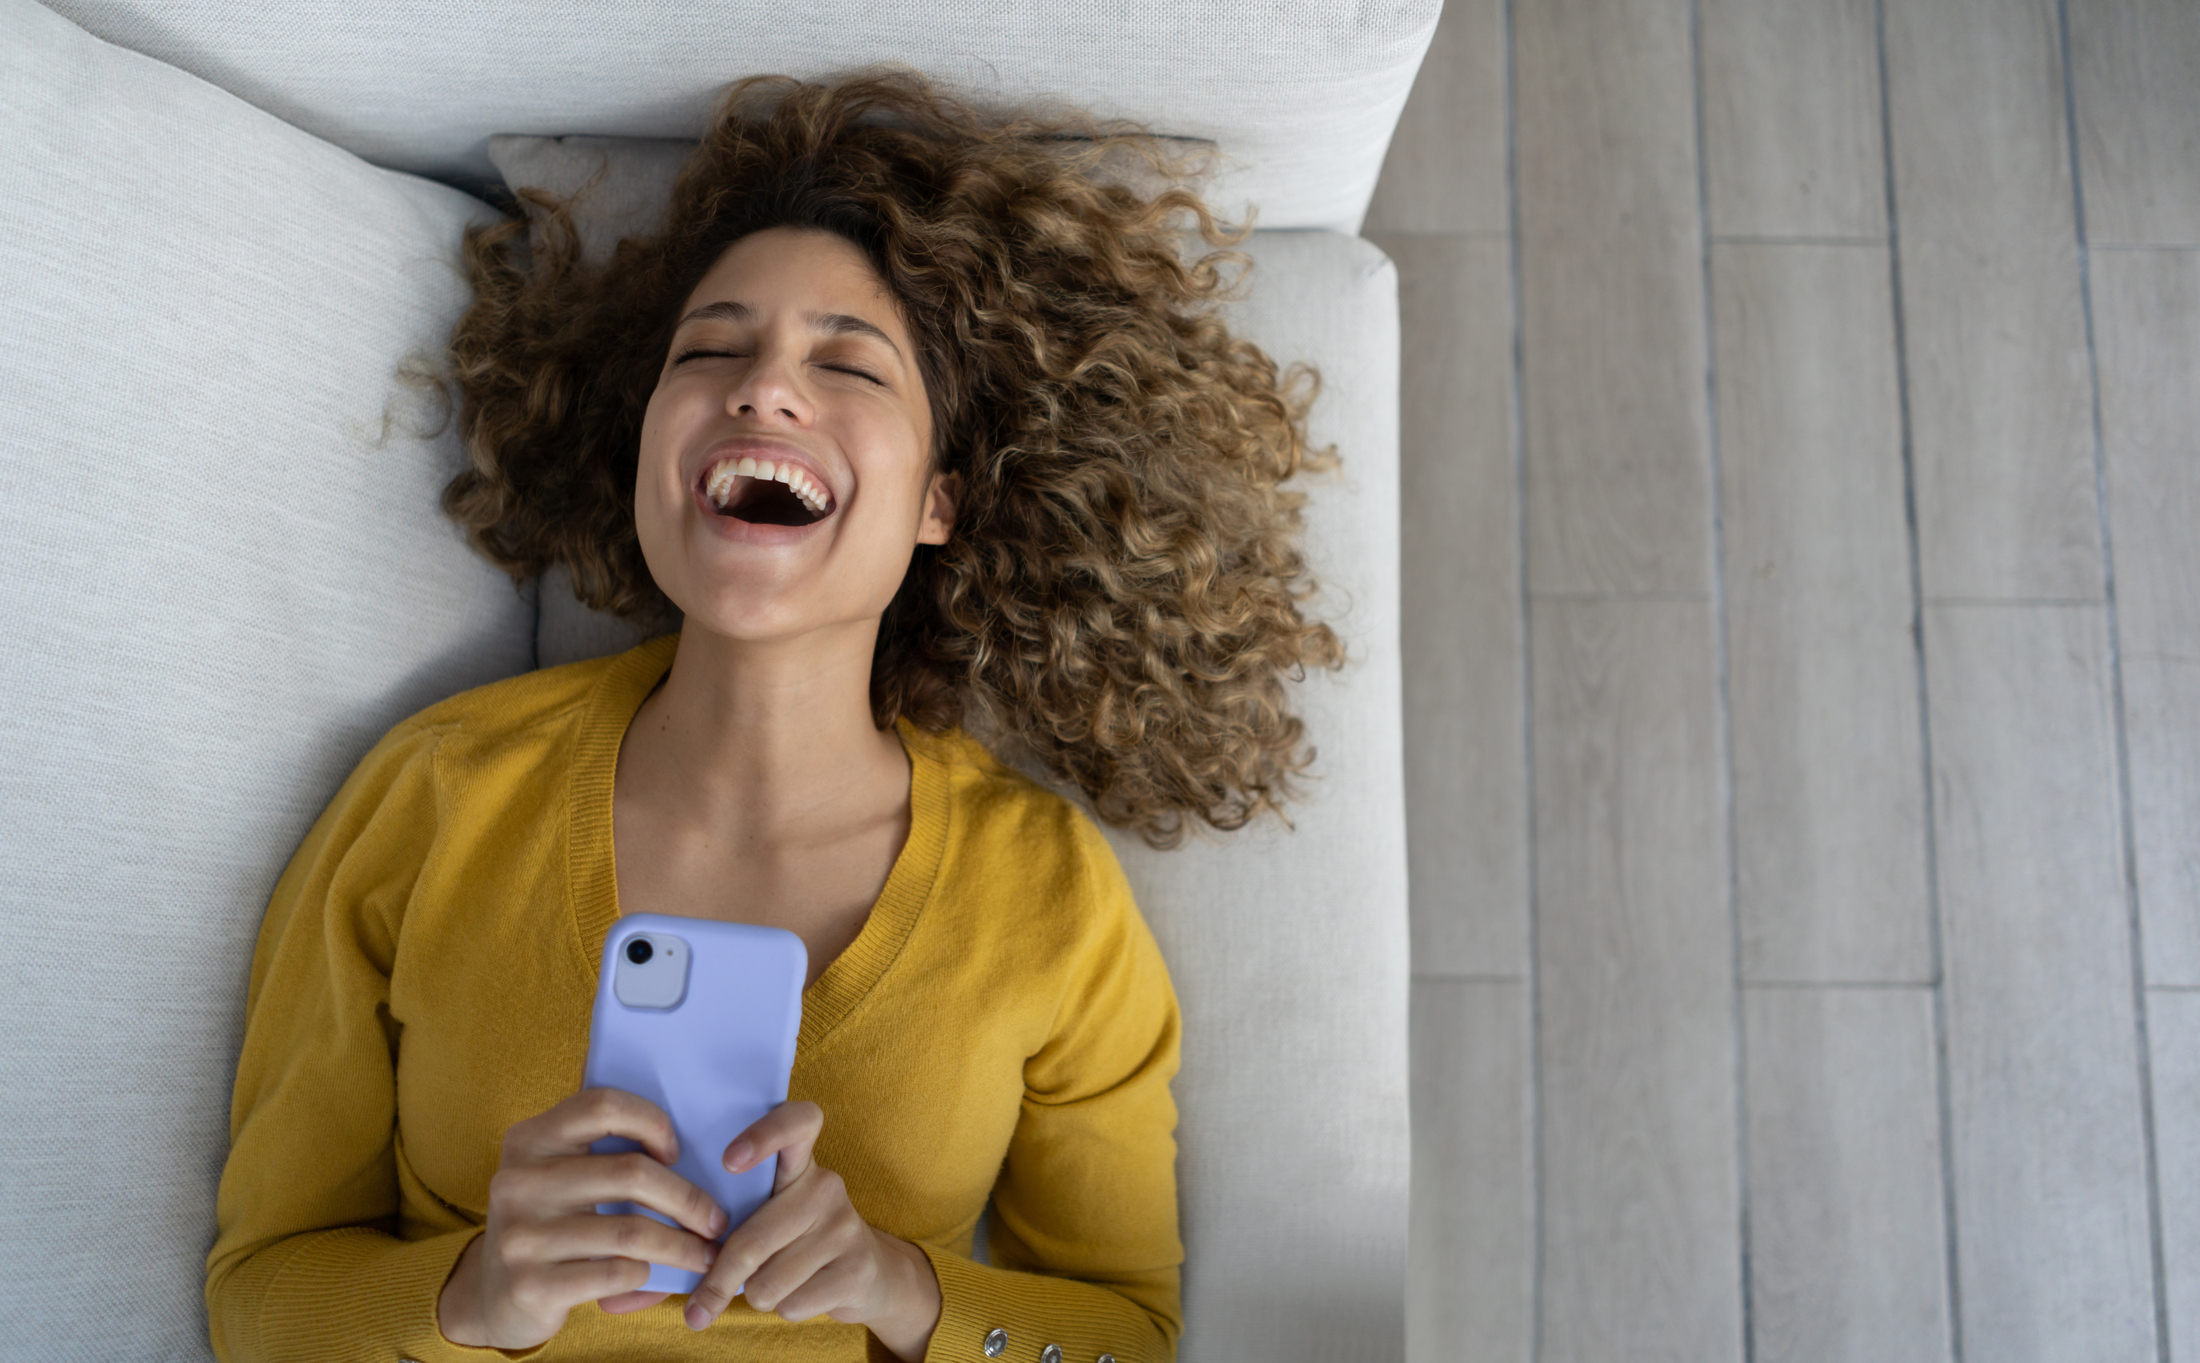 Woman laughing after watching something funny on her cell phone